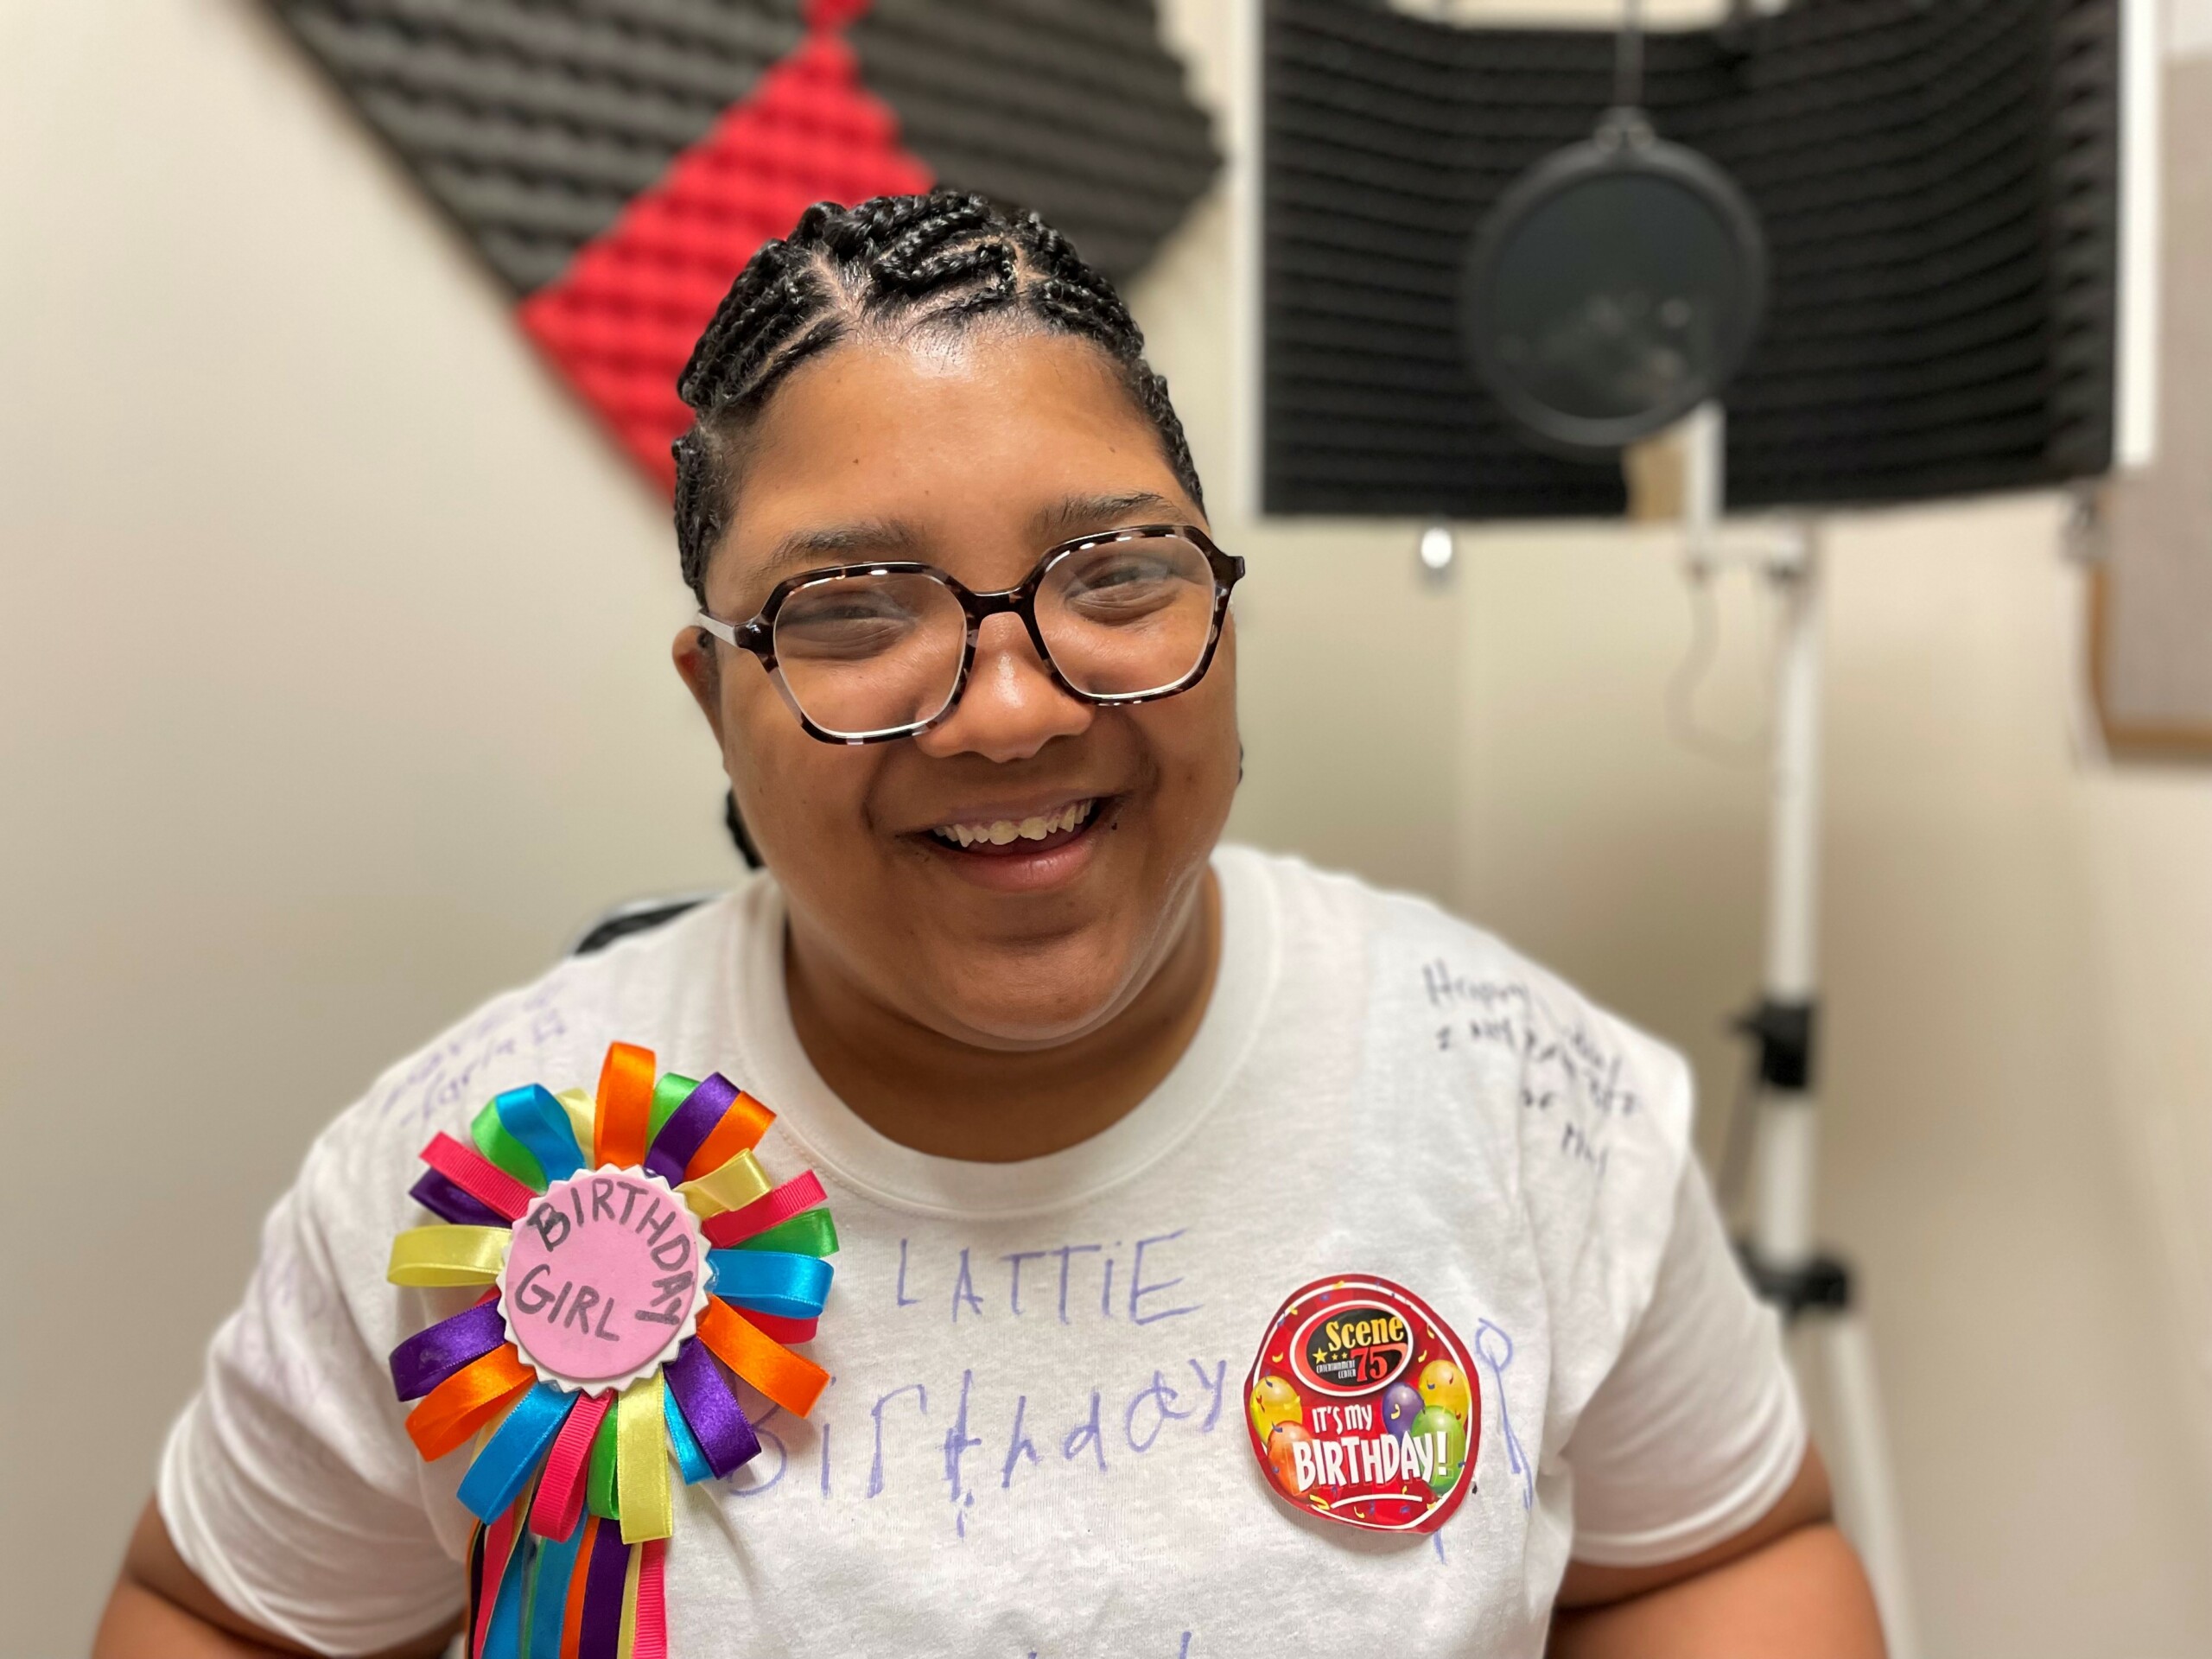 Smiling woman in white t-shirt with colorful birthday girl ribbon. She is sitting in a recording studio.